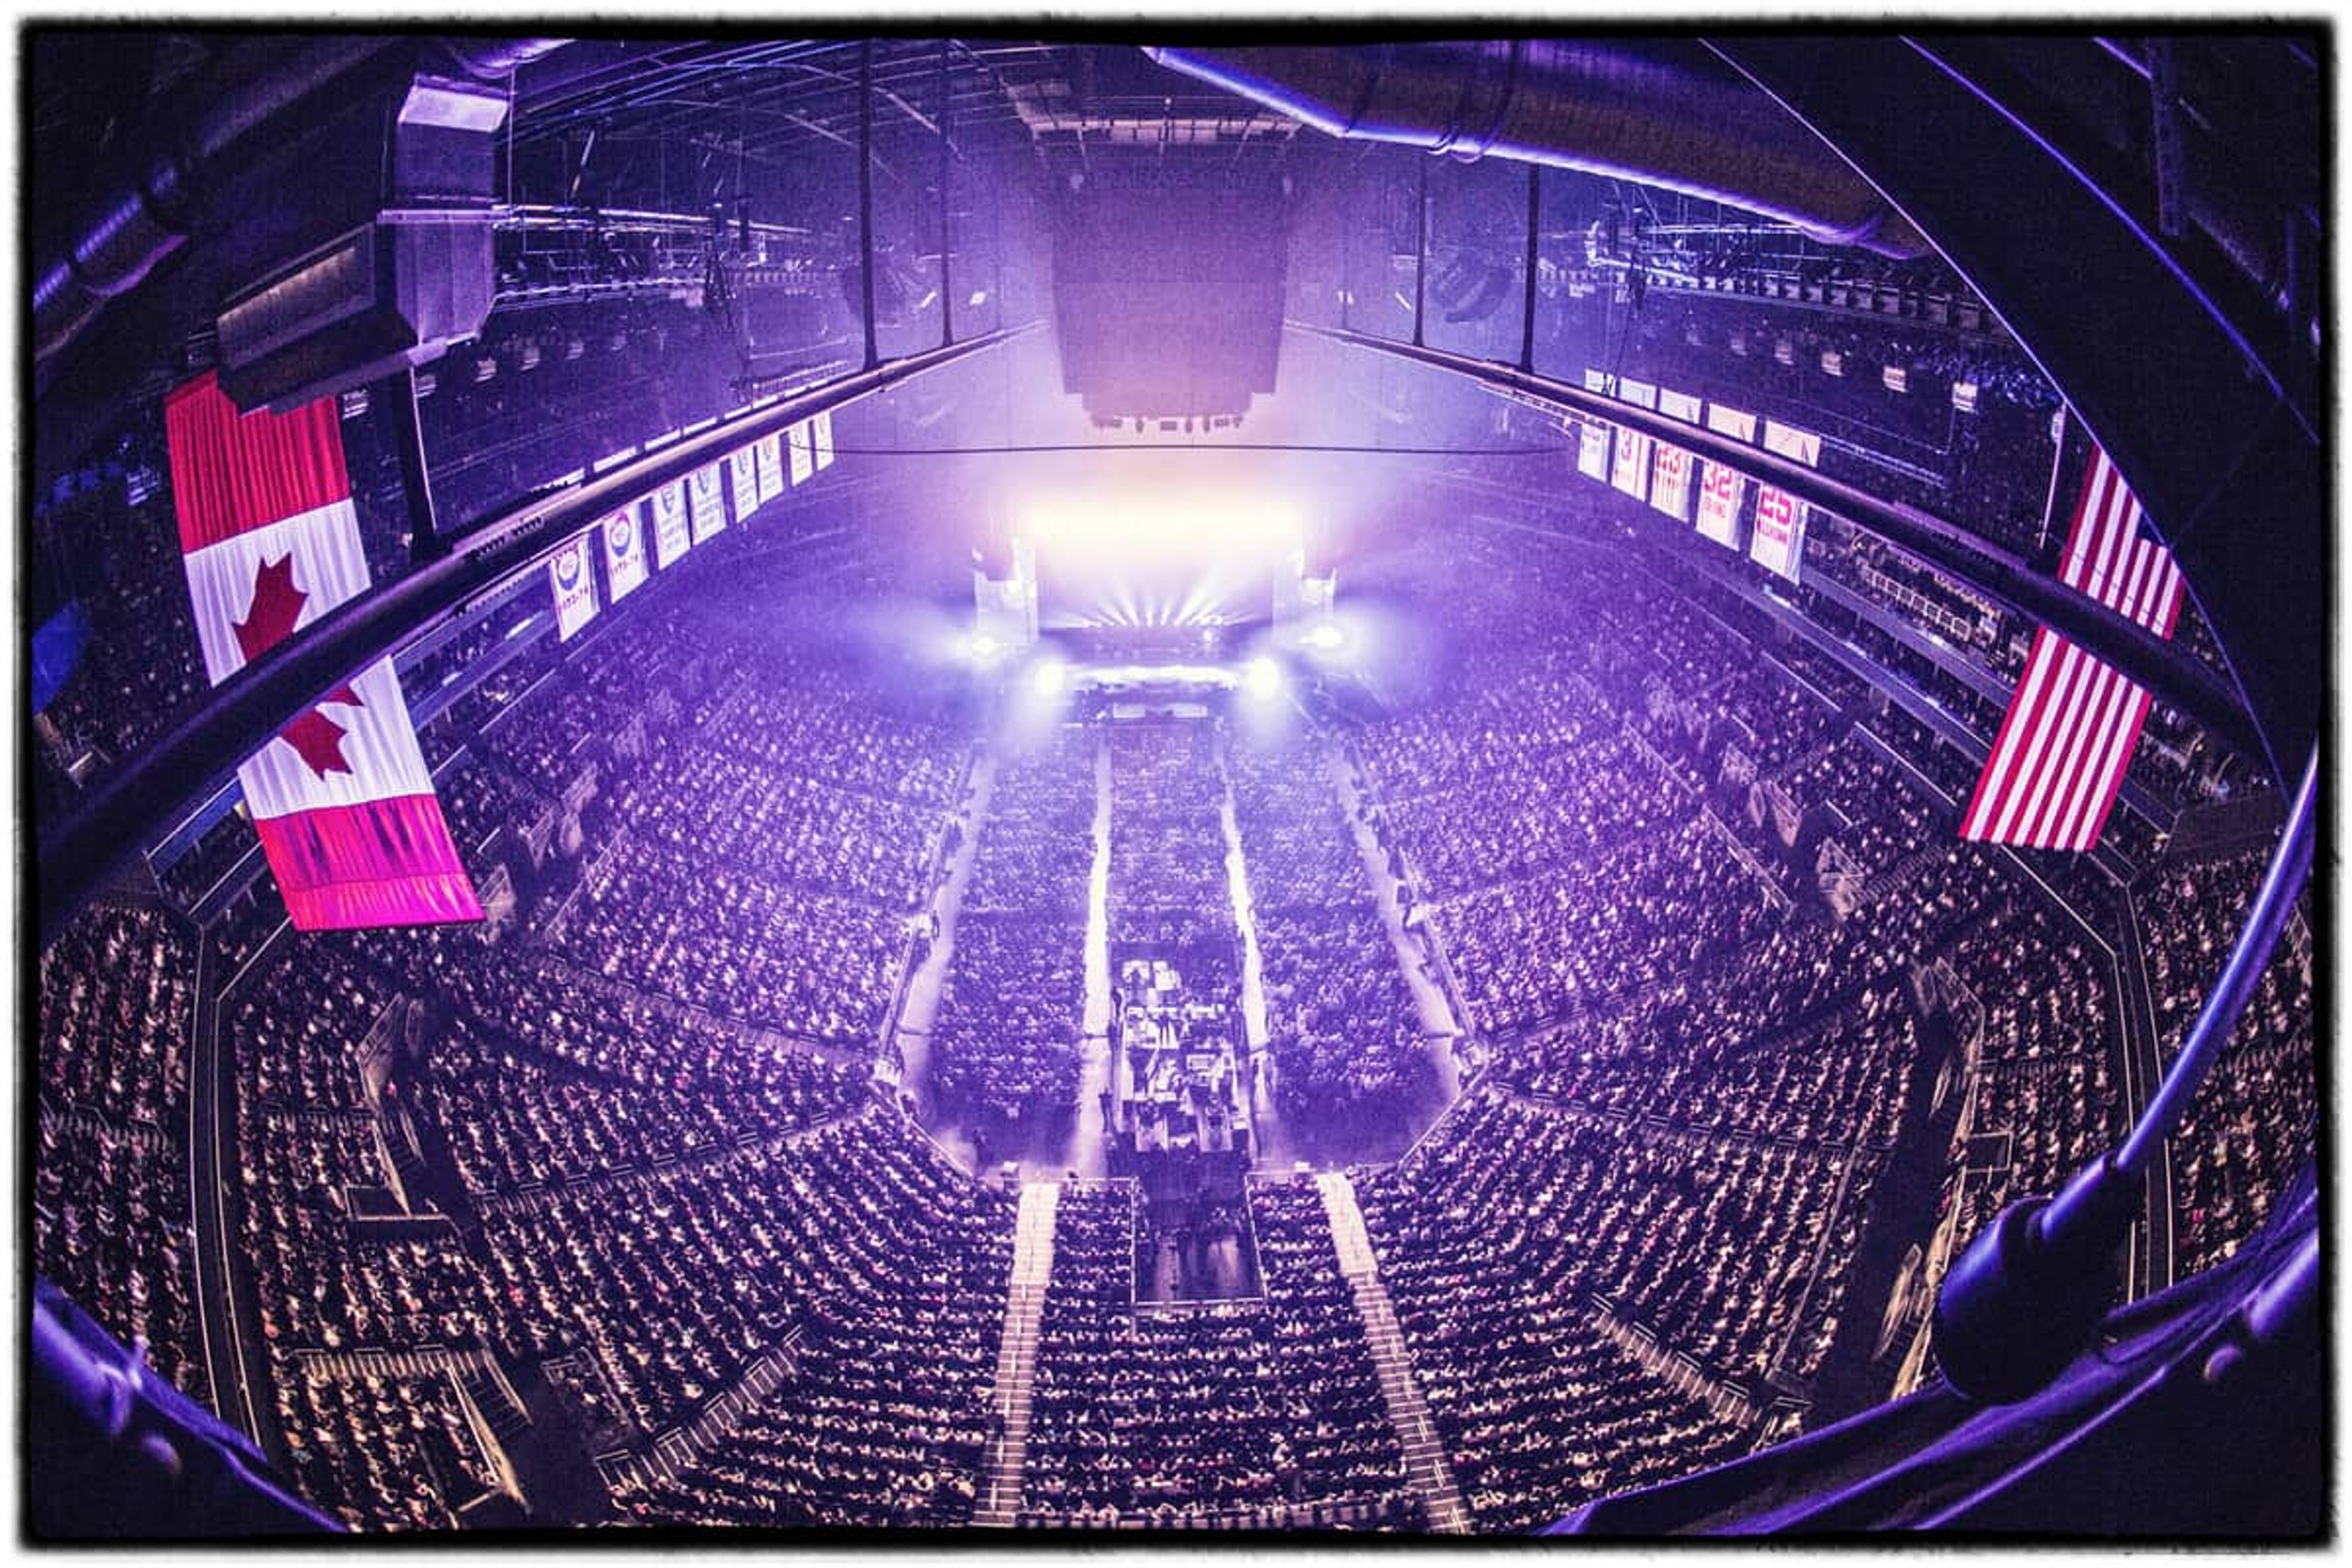 The venue from the rafters, Barclays Center, Brooklyn, 8th June 2013